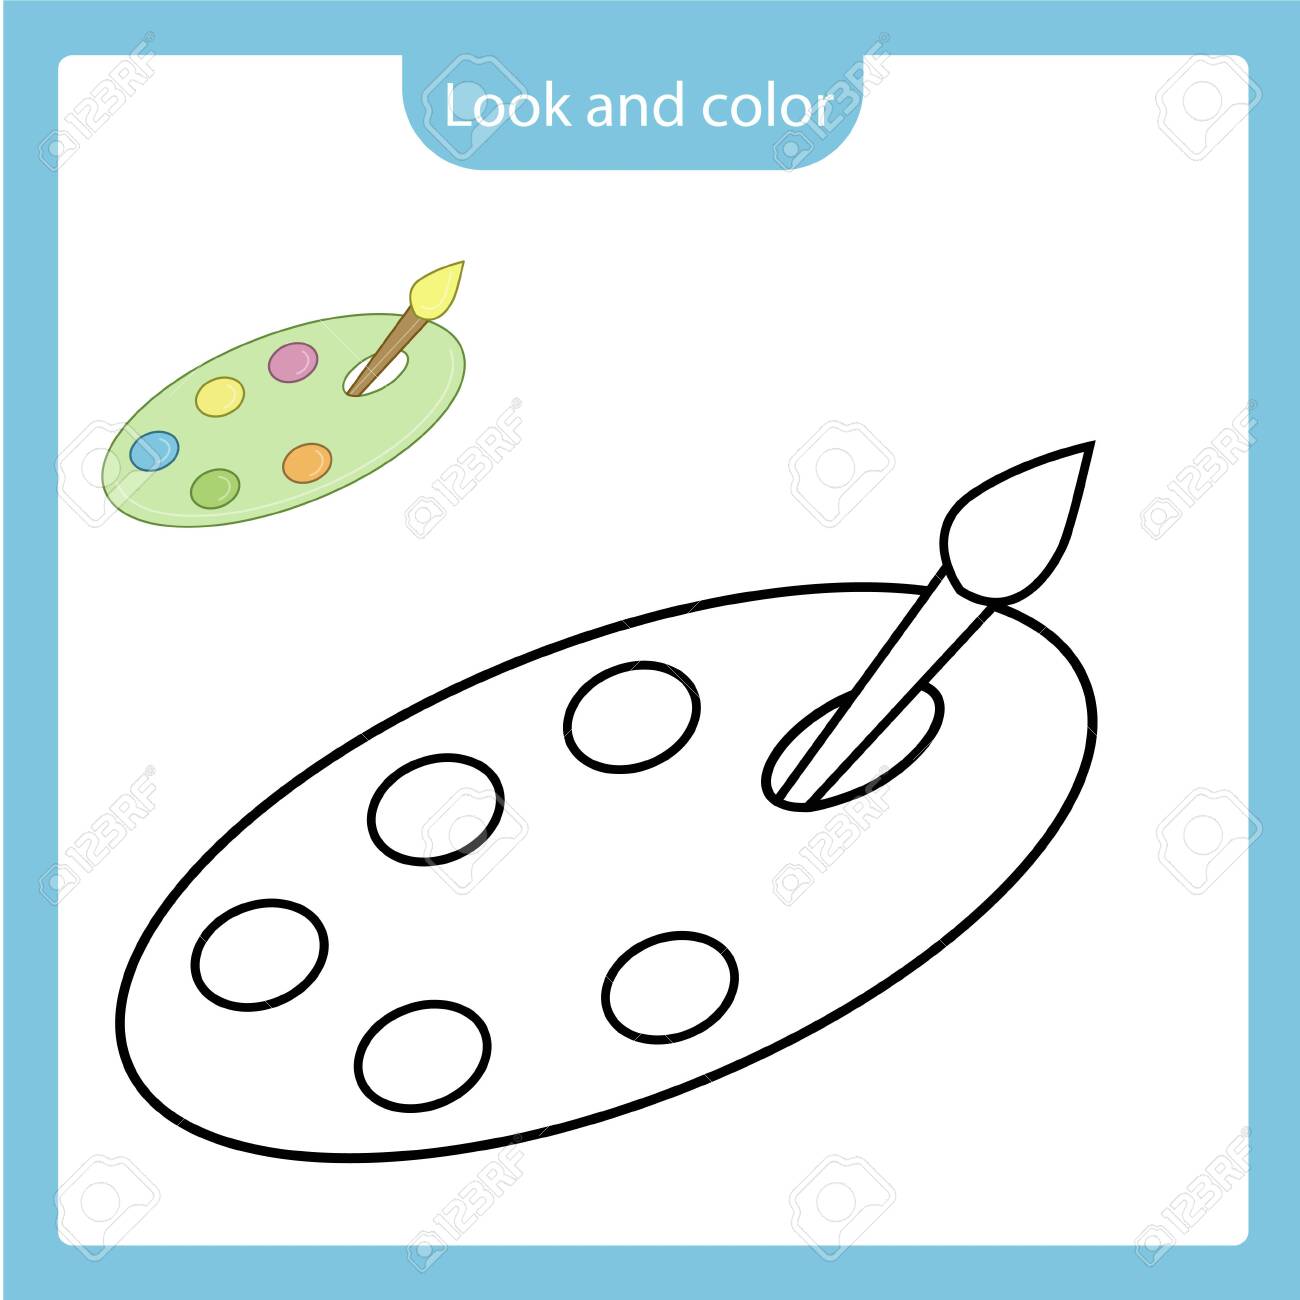 Look and color coloring page outline of brush and paint on the palette toy with example simple shapes vector illustration coloring book for kids royalty free svg cliparts vectors and stock illustration